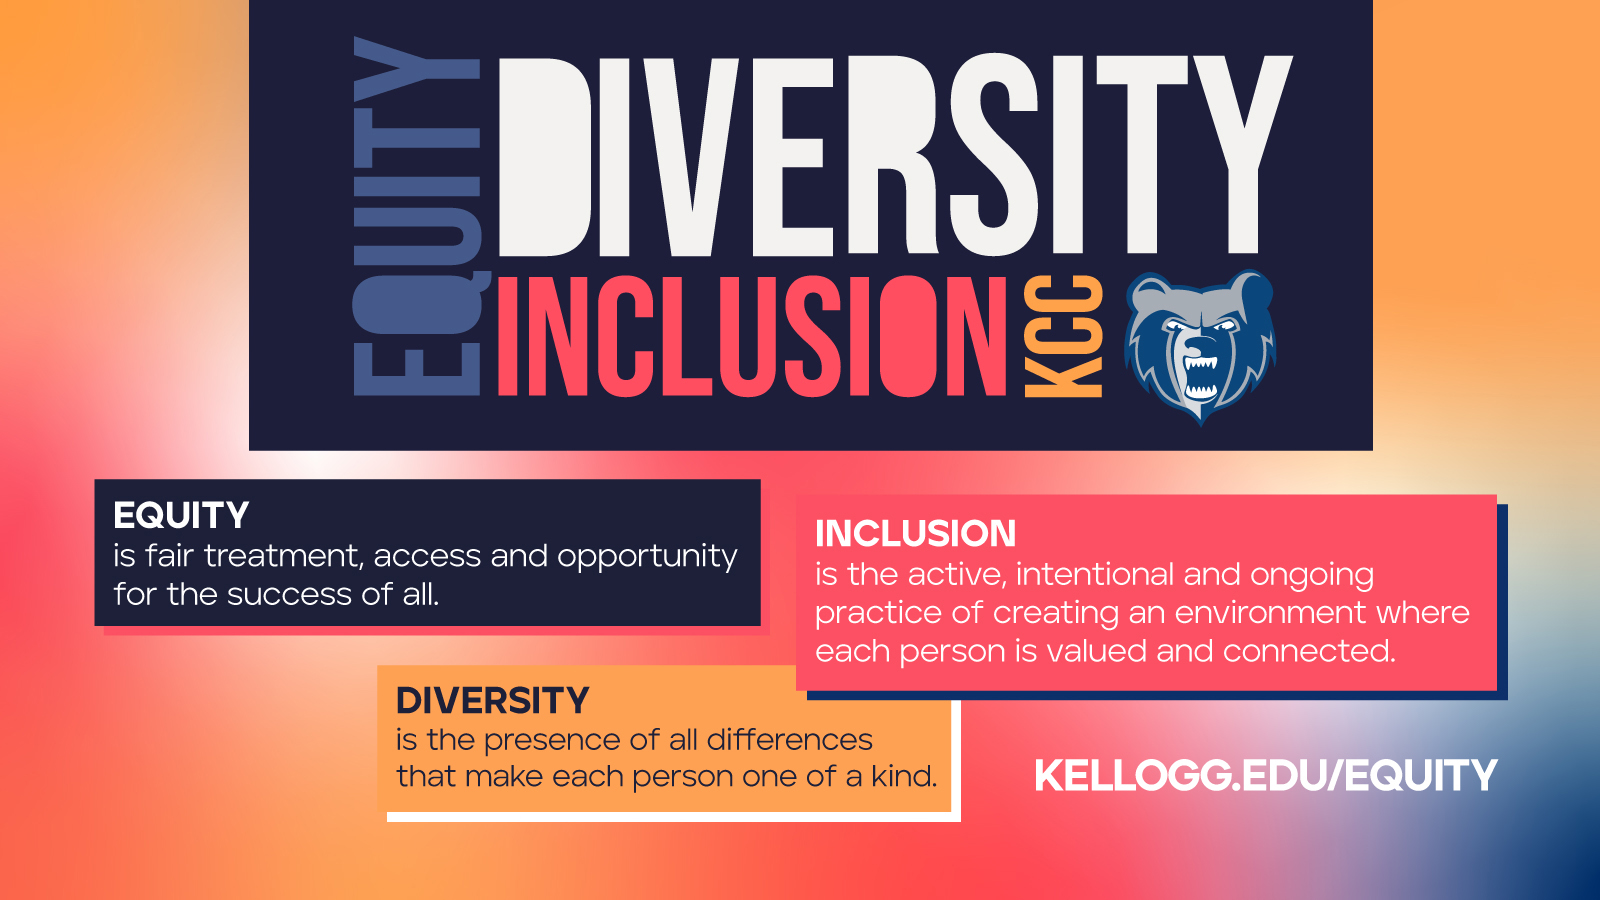 Text that reads, "Equity. Diversity. Inclusion. KCC. Equity is fair treatment, access, and opportunity for the success of all. Diversity is the presence of differences that make each person one of a kind. Inclusion is the active, intentional, and ongoing practice of creating an environment where each person is valued and connected."